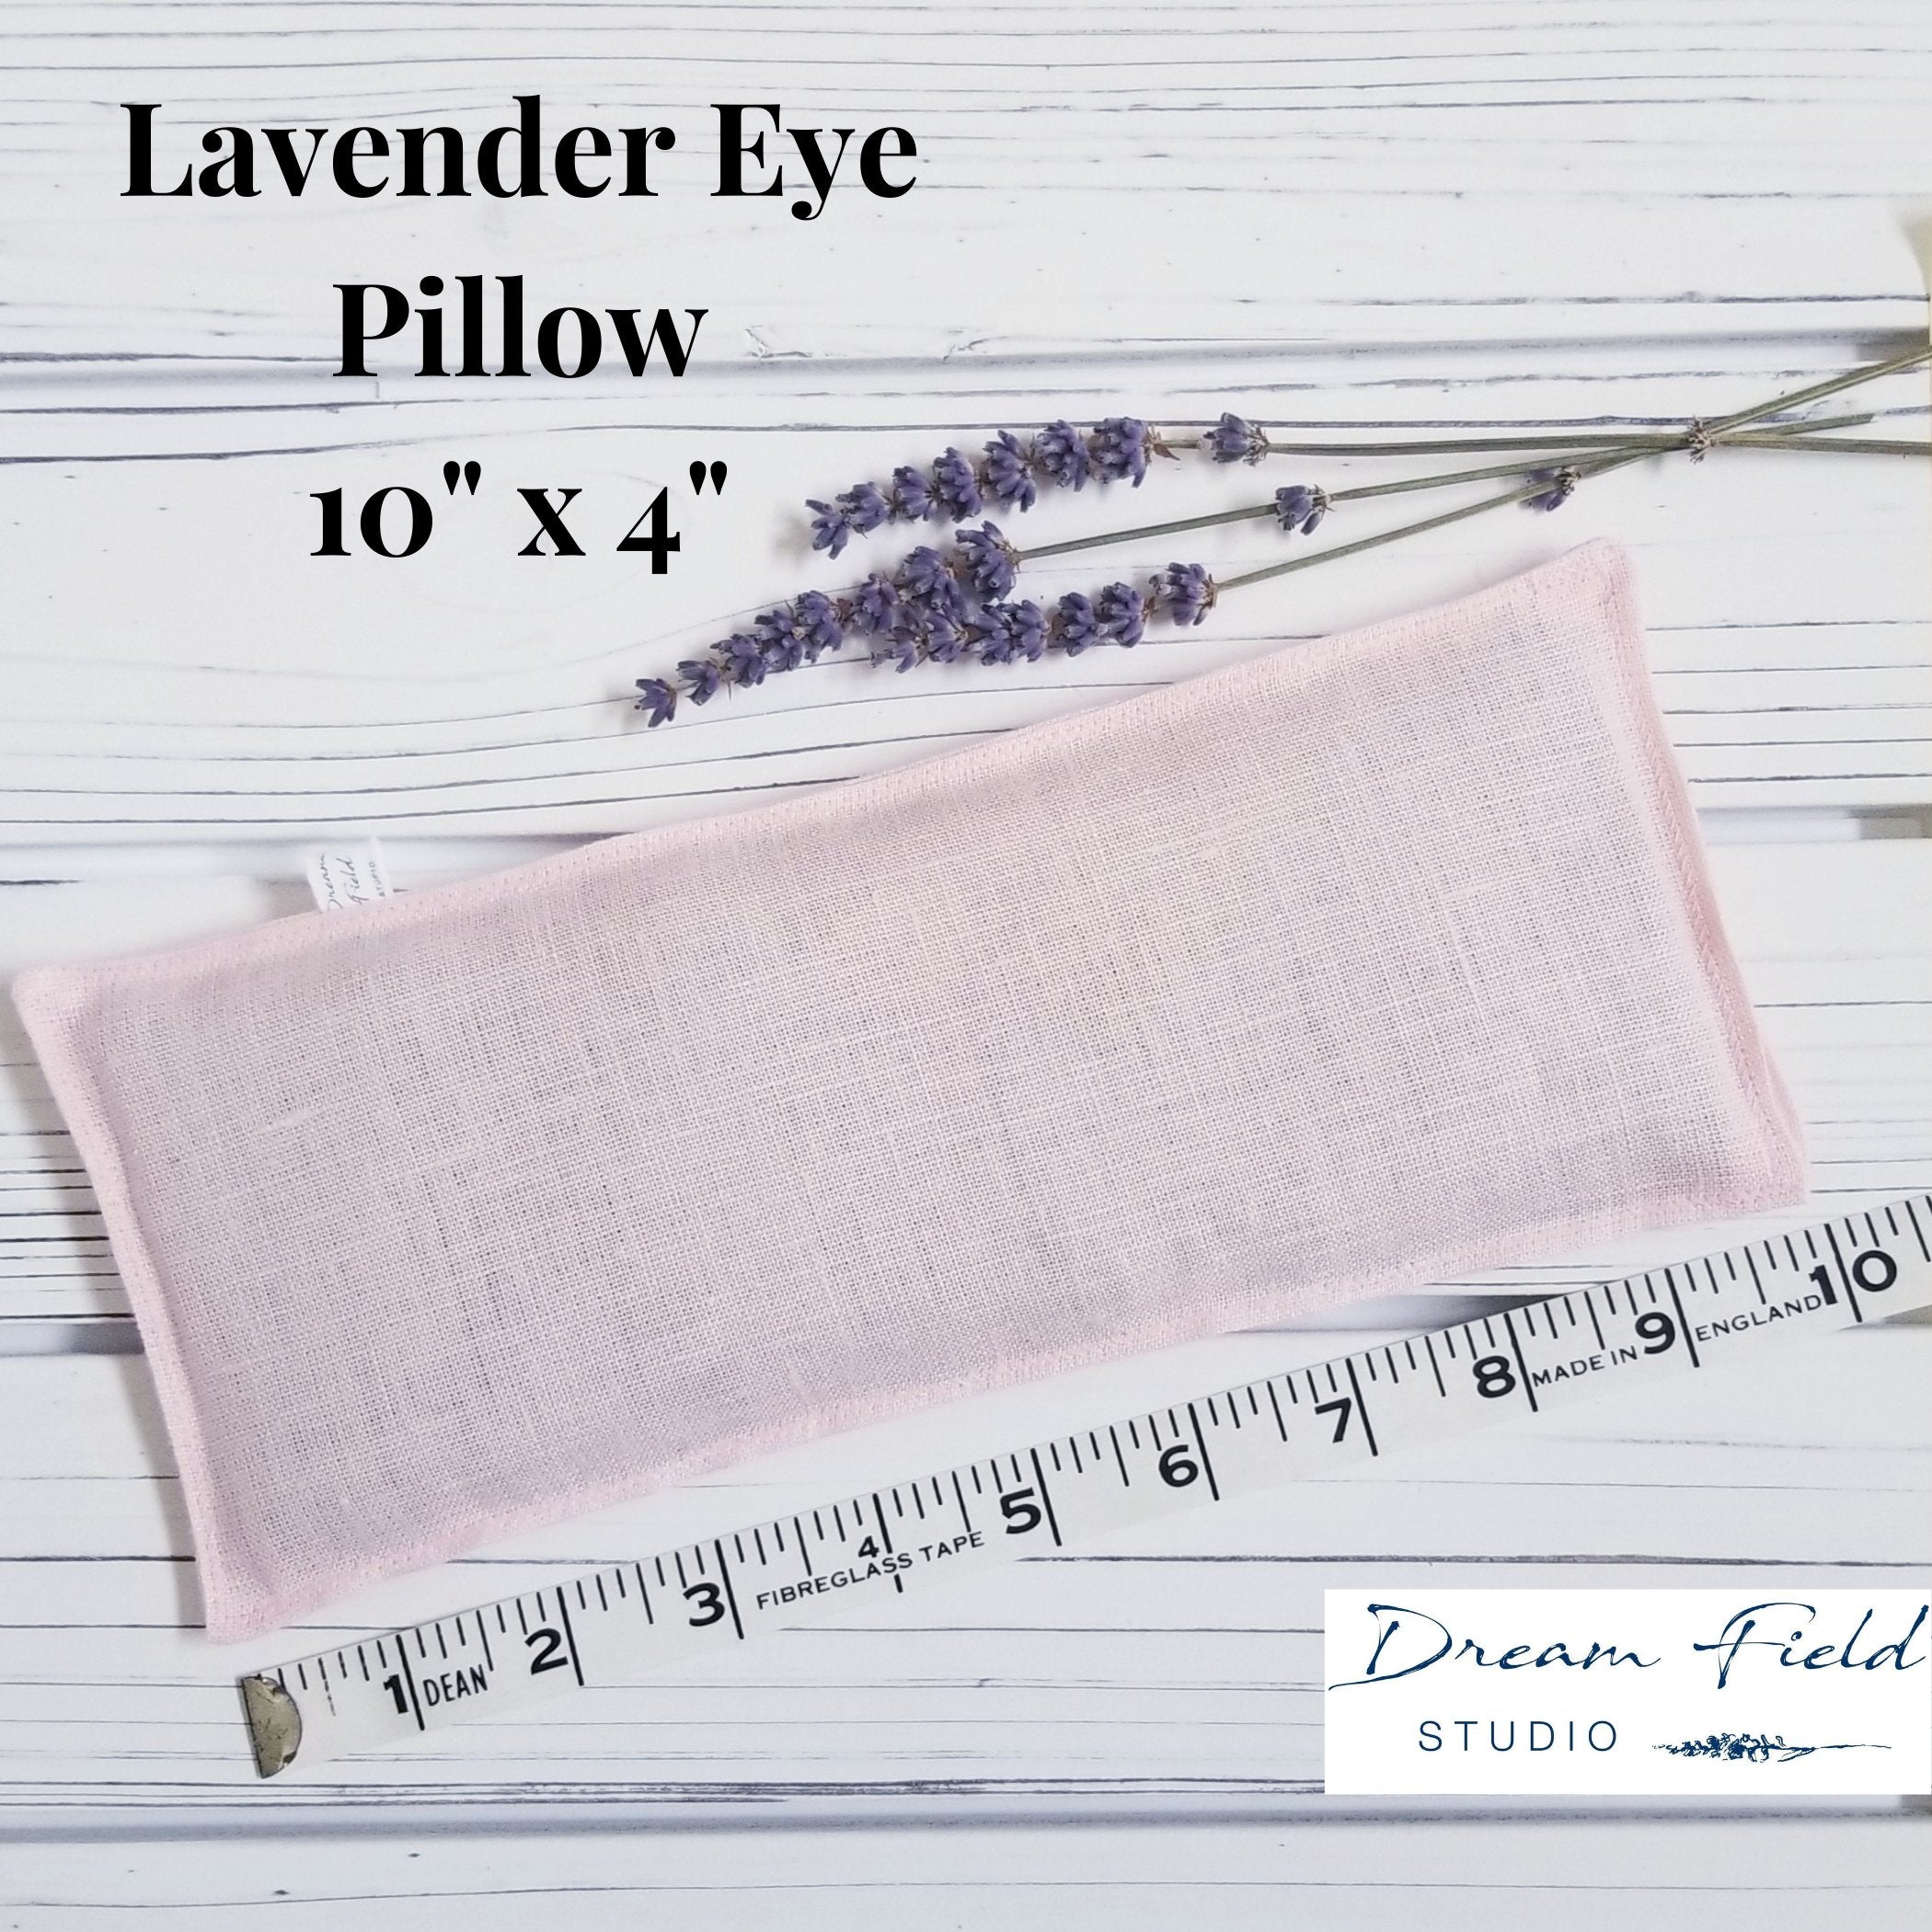 Lavender Eye Pillow 10" x 4" Size Specifications